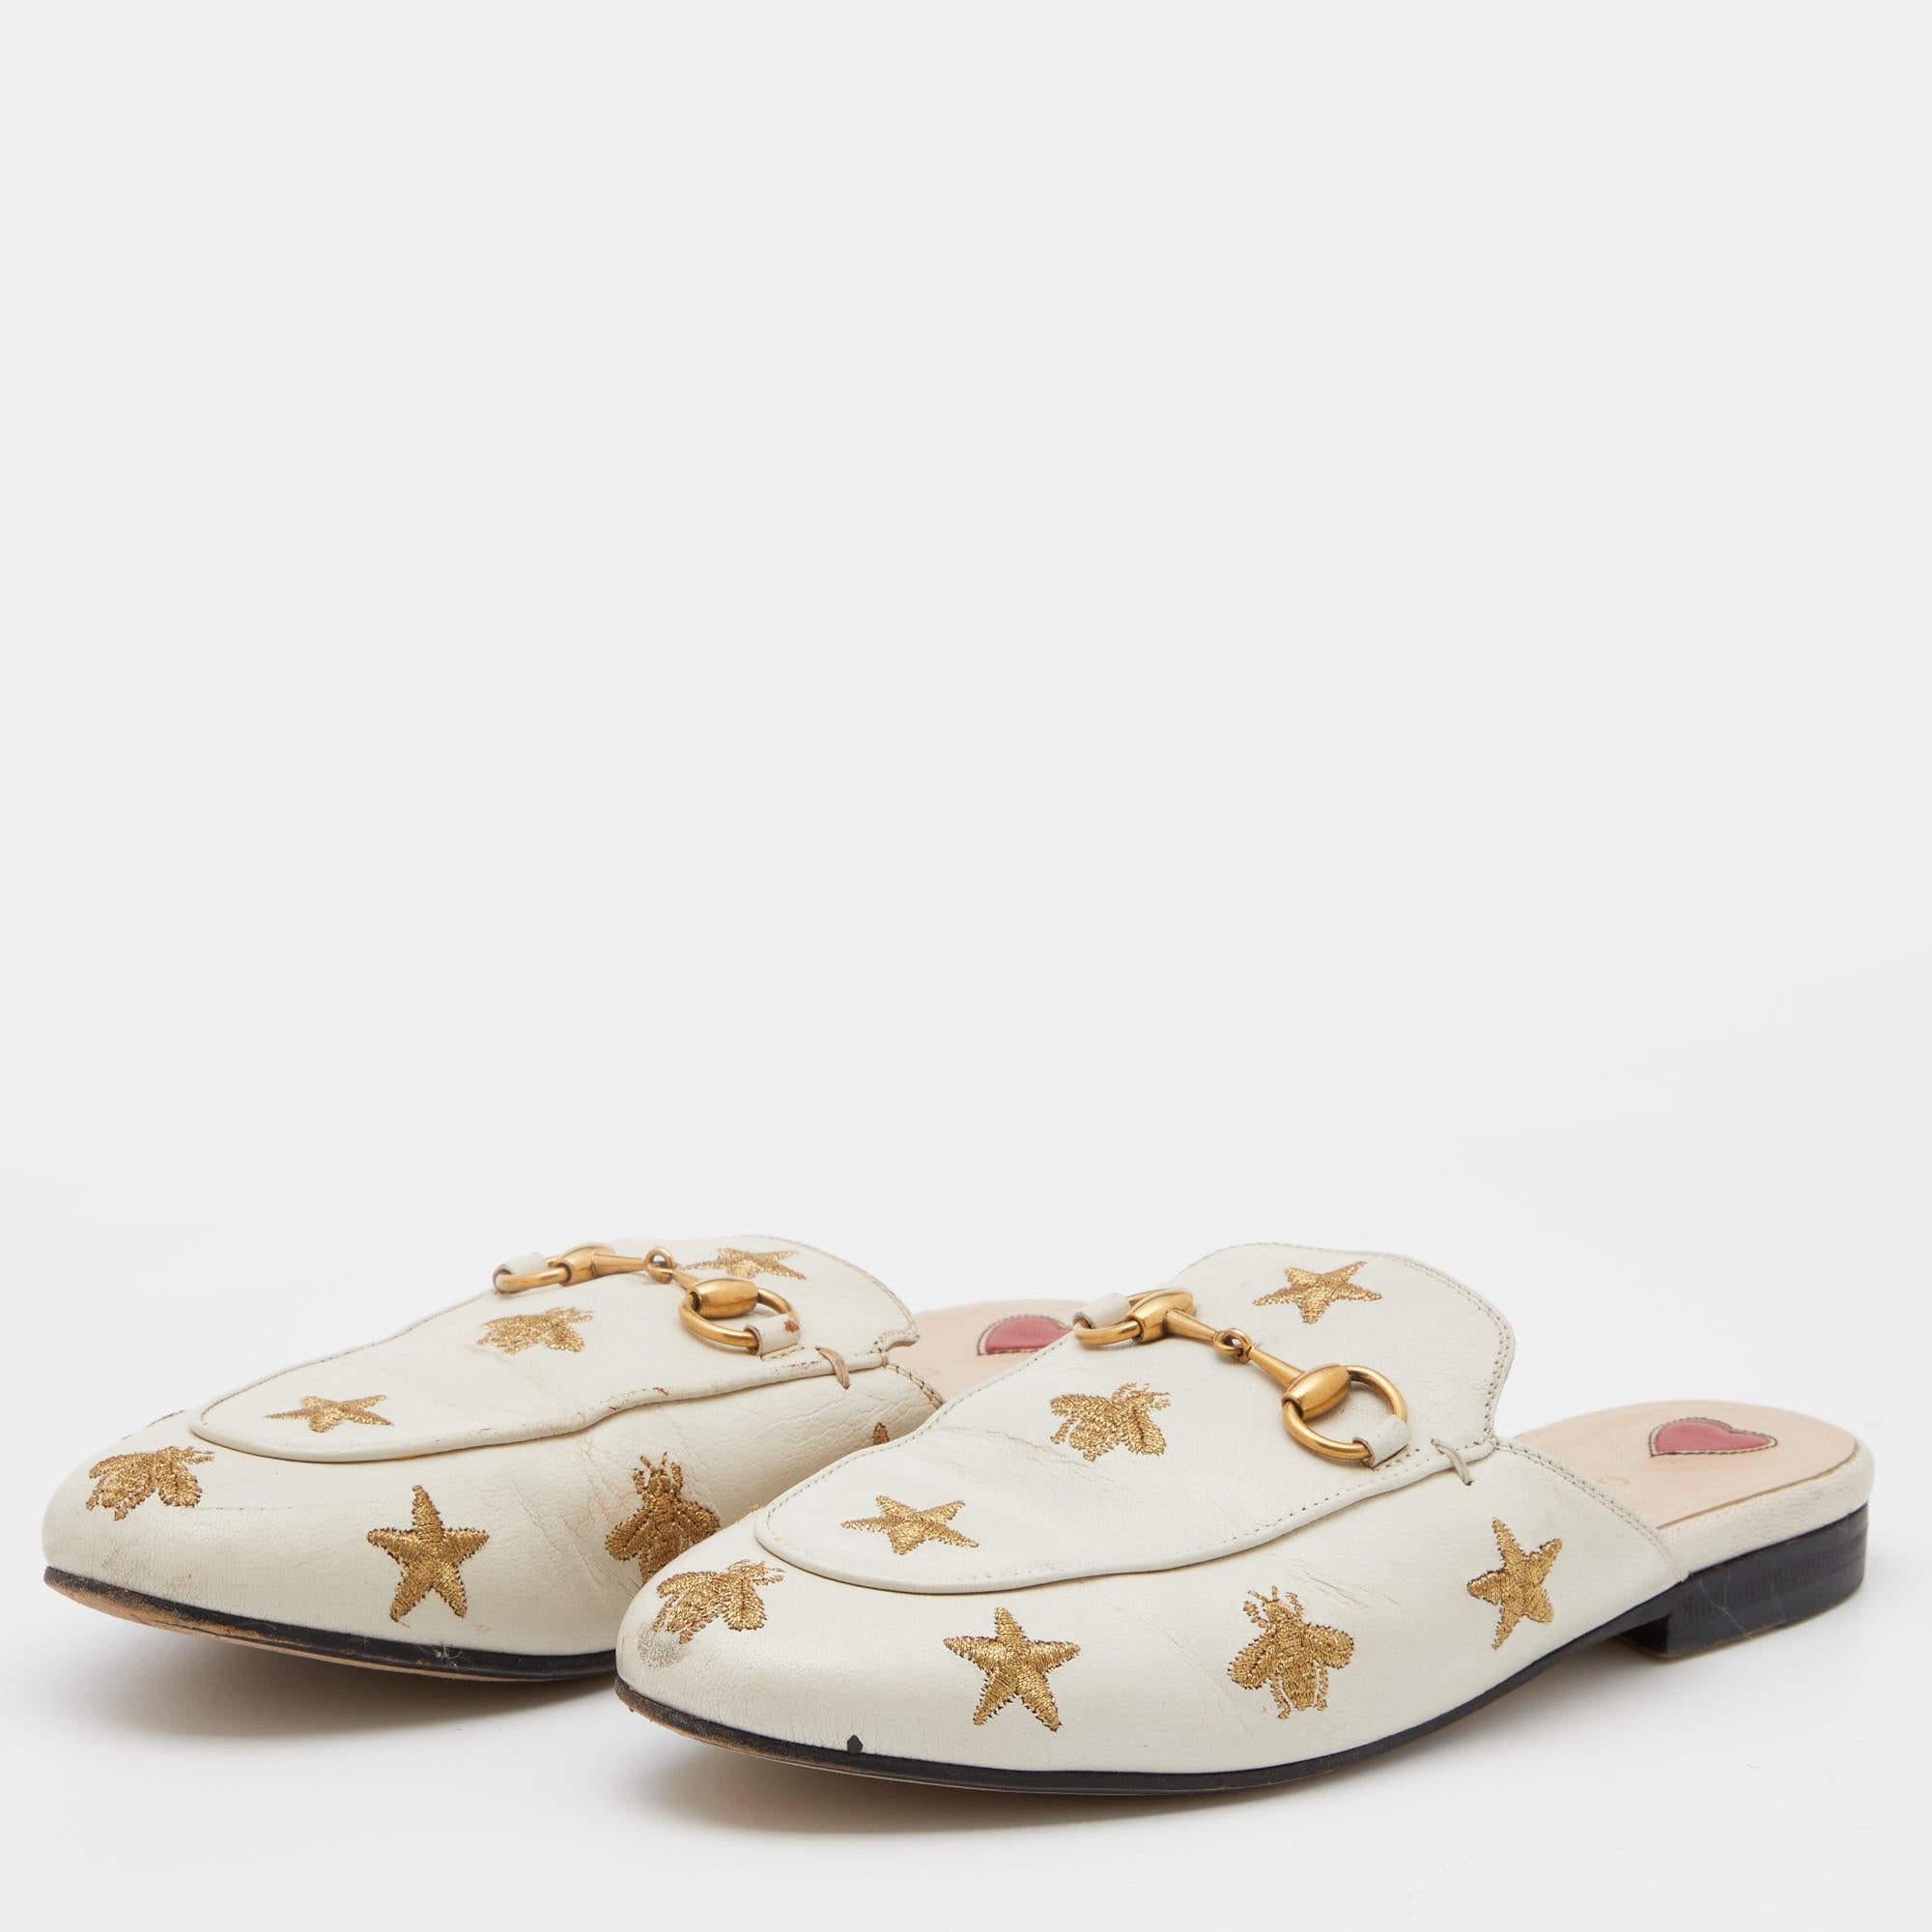 These Gucci Princetown mules are a fresh update on the perennially chic Gucci loafers. They are enhanced by the signature Horsebit hardware, star, and bee motifs that have defined the Gucci collection since the very beginning. Featuring a leather